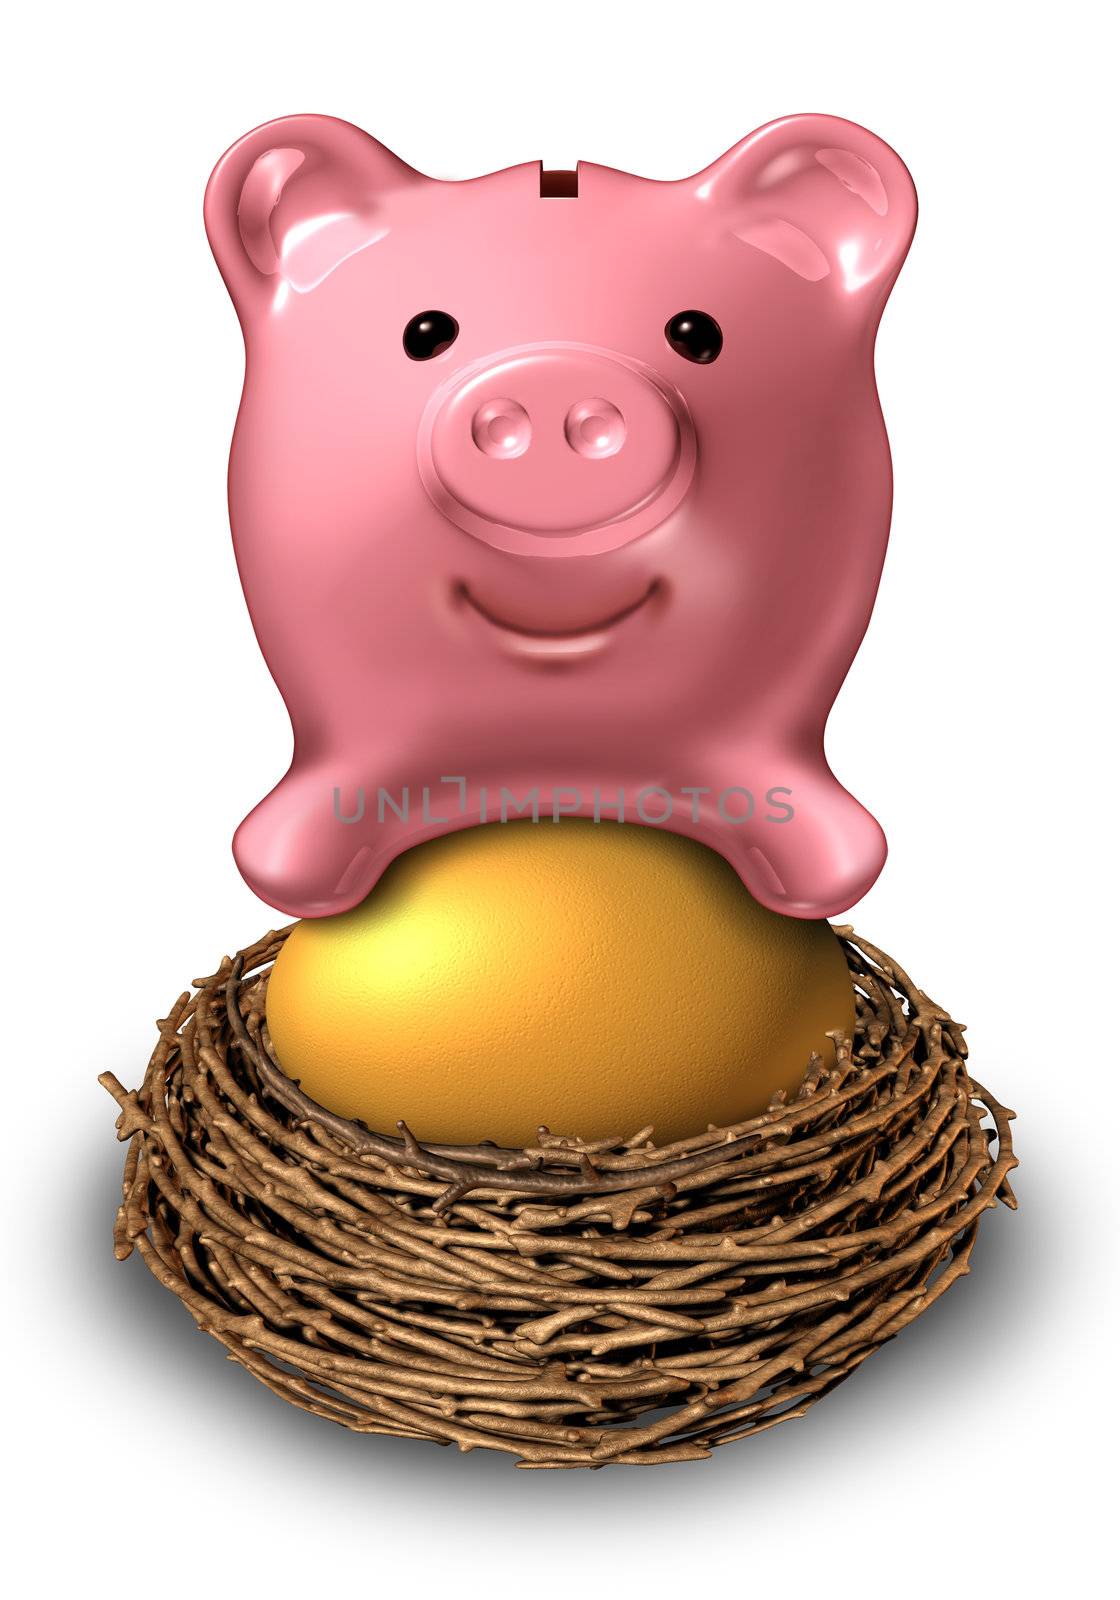 Savings nest egg with a pink ceramic piggy bank sitting on a gold investment fund symbol as a financial concept of managing wealth for a safe and secure retirement pension plan.